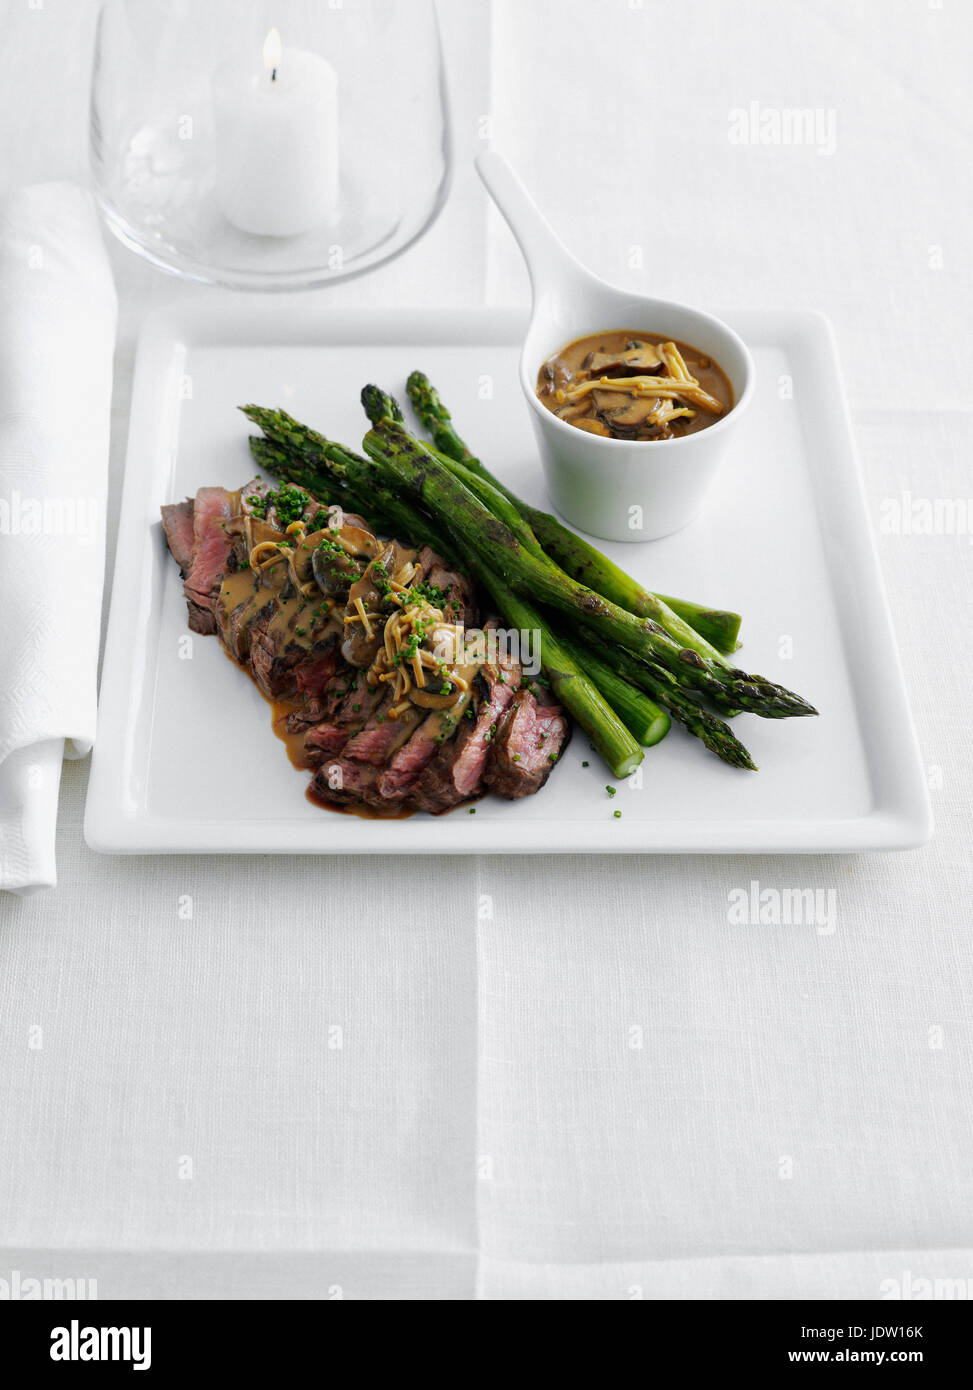 Plate of meat with asparagus and sauce Stock Photo